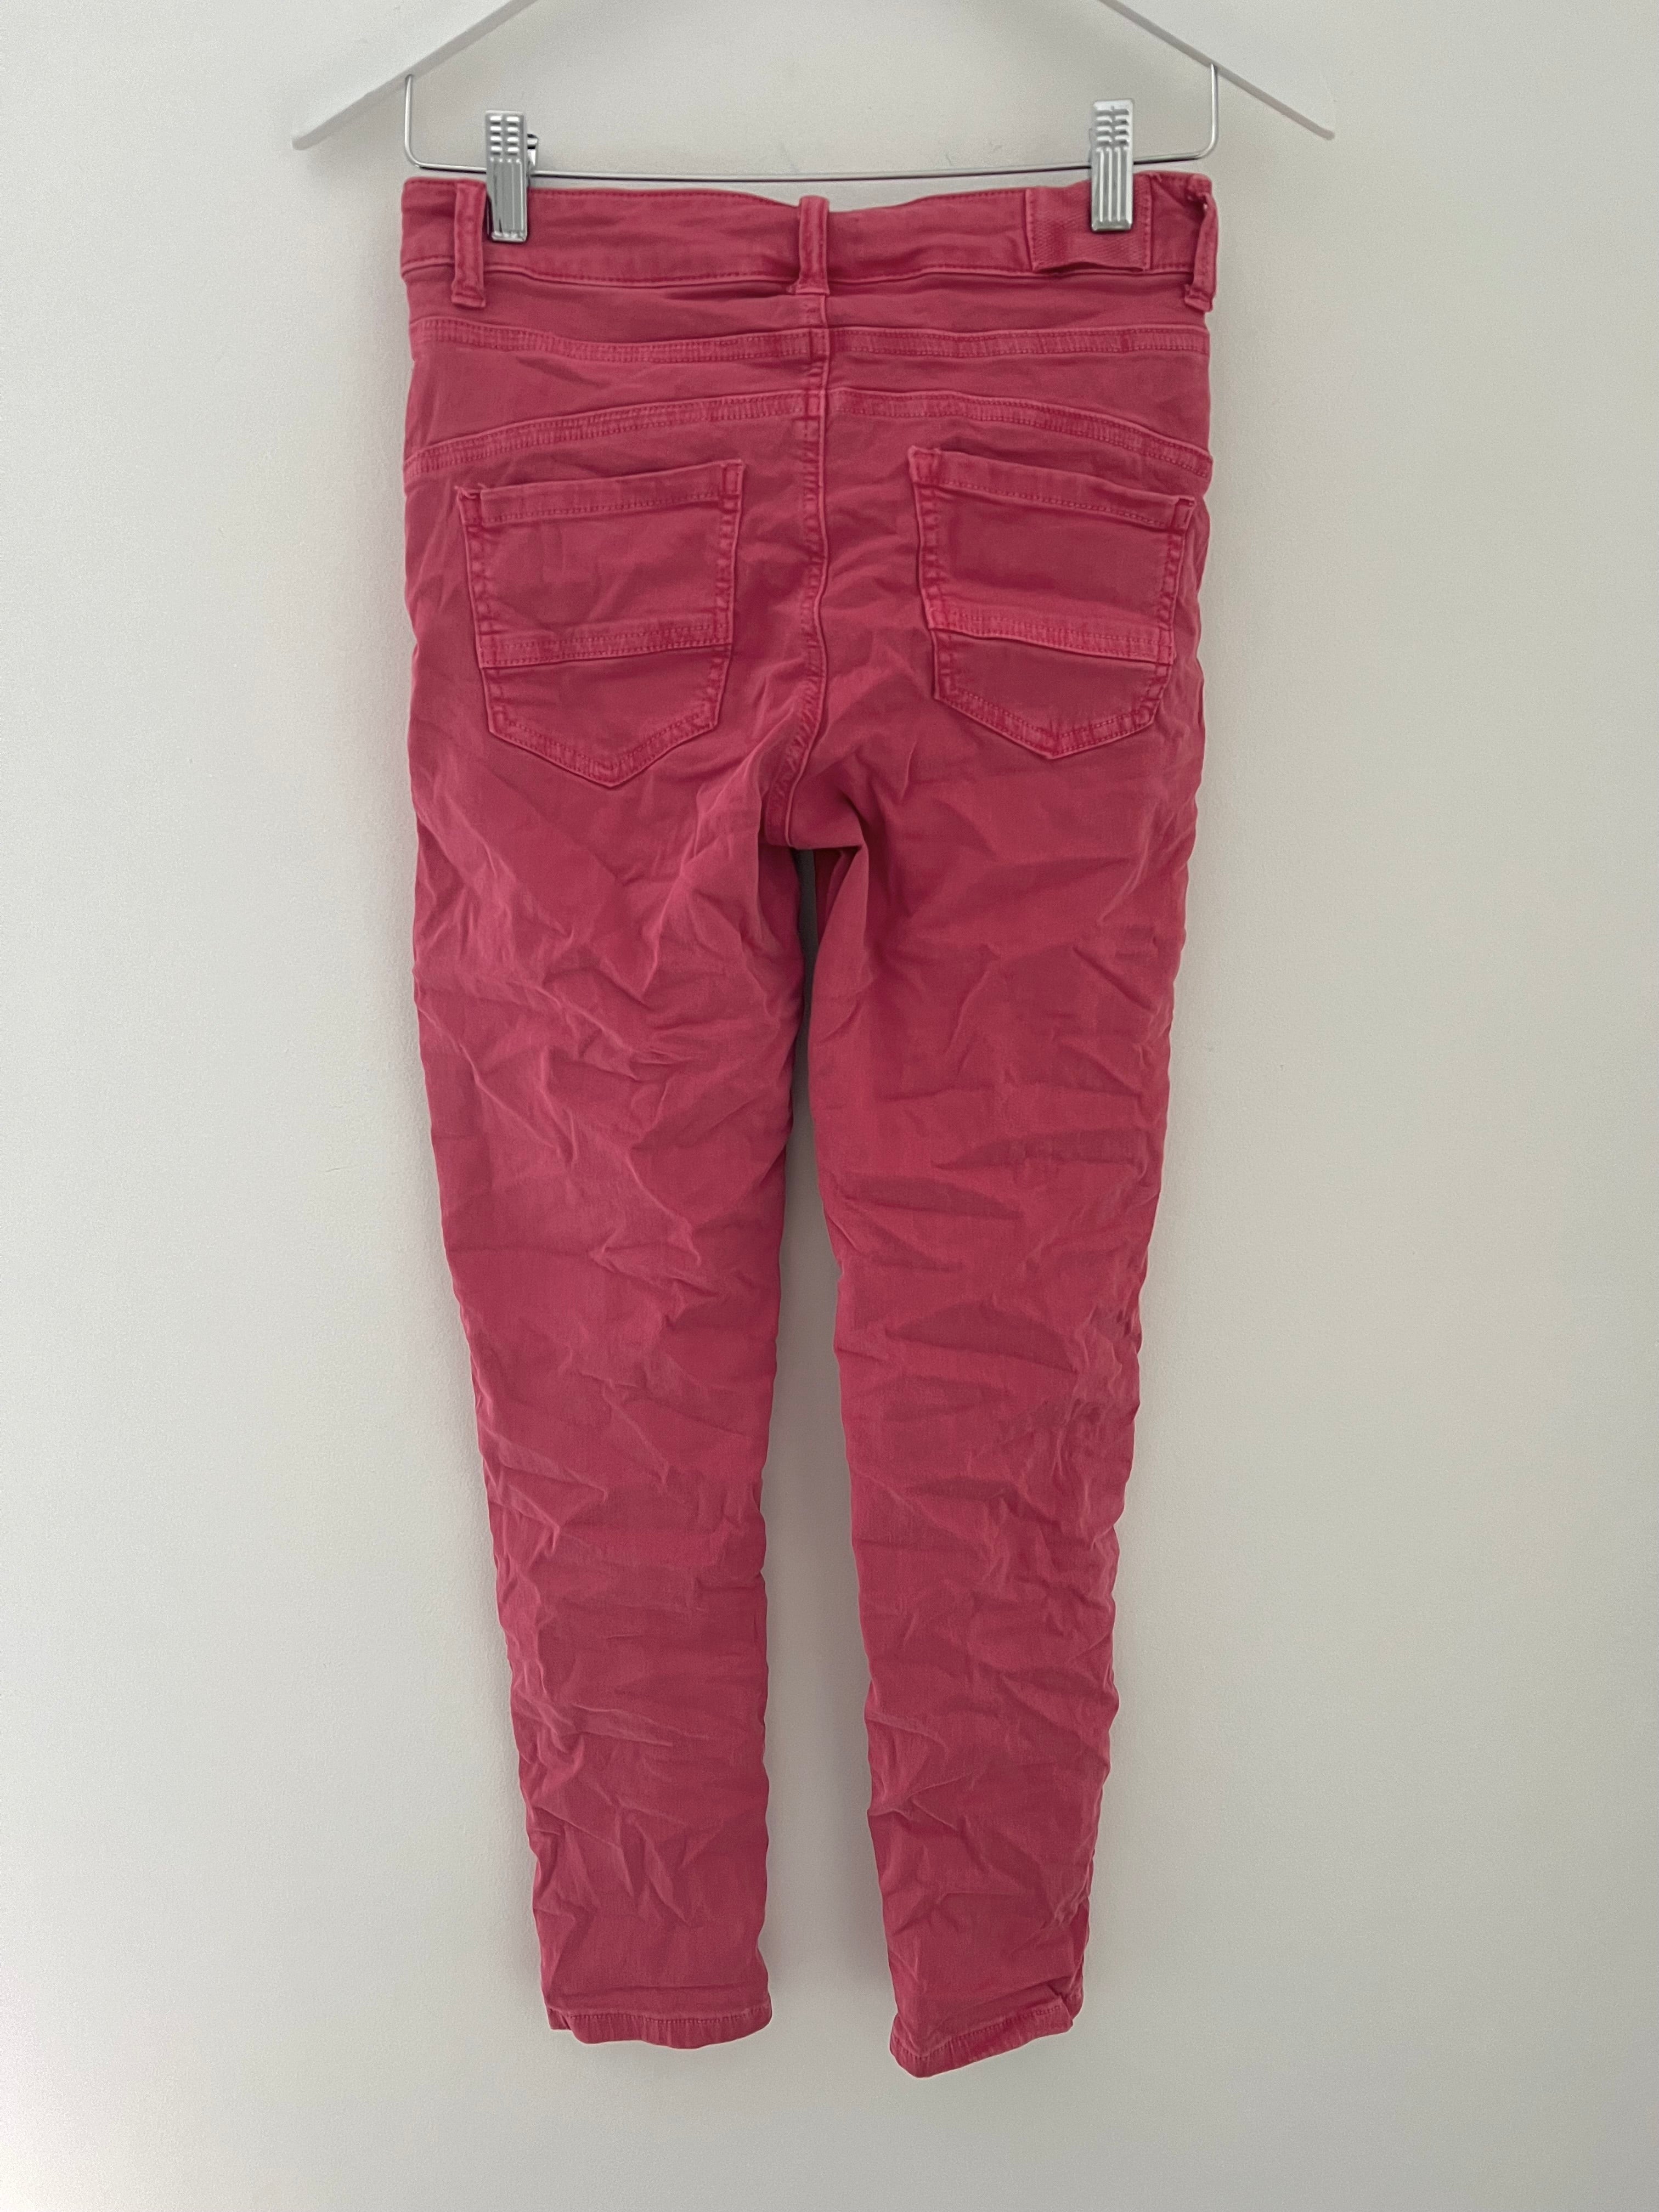 Button Fly Stretch Jeans in Soft Raspberry